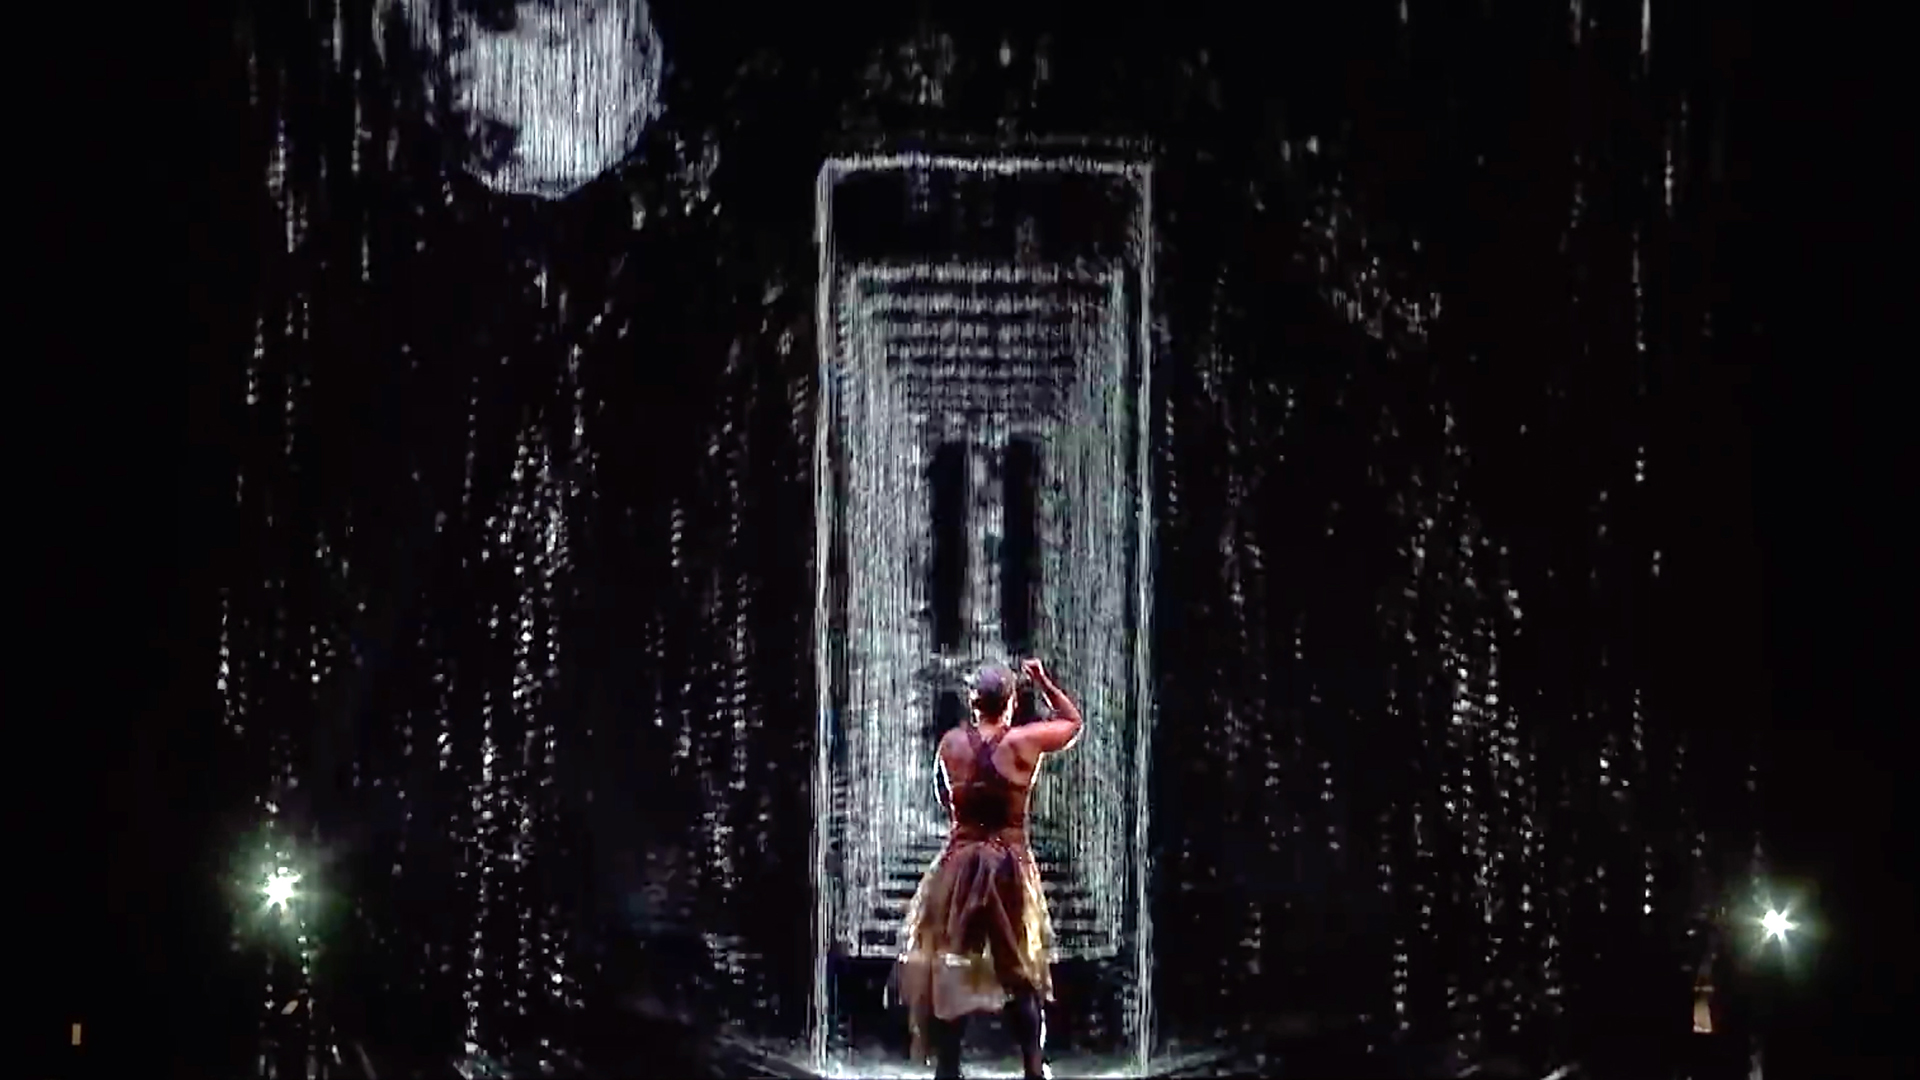 P!nk x BRIT Awards 2019 - Water Projection Performance_1